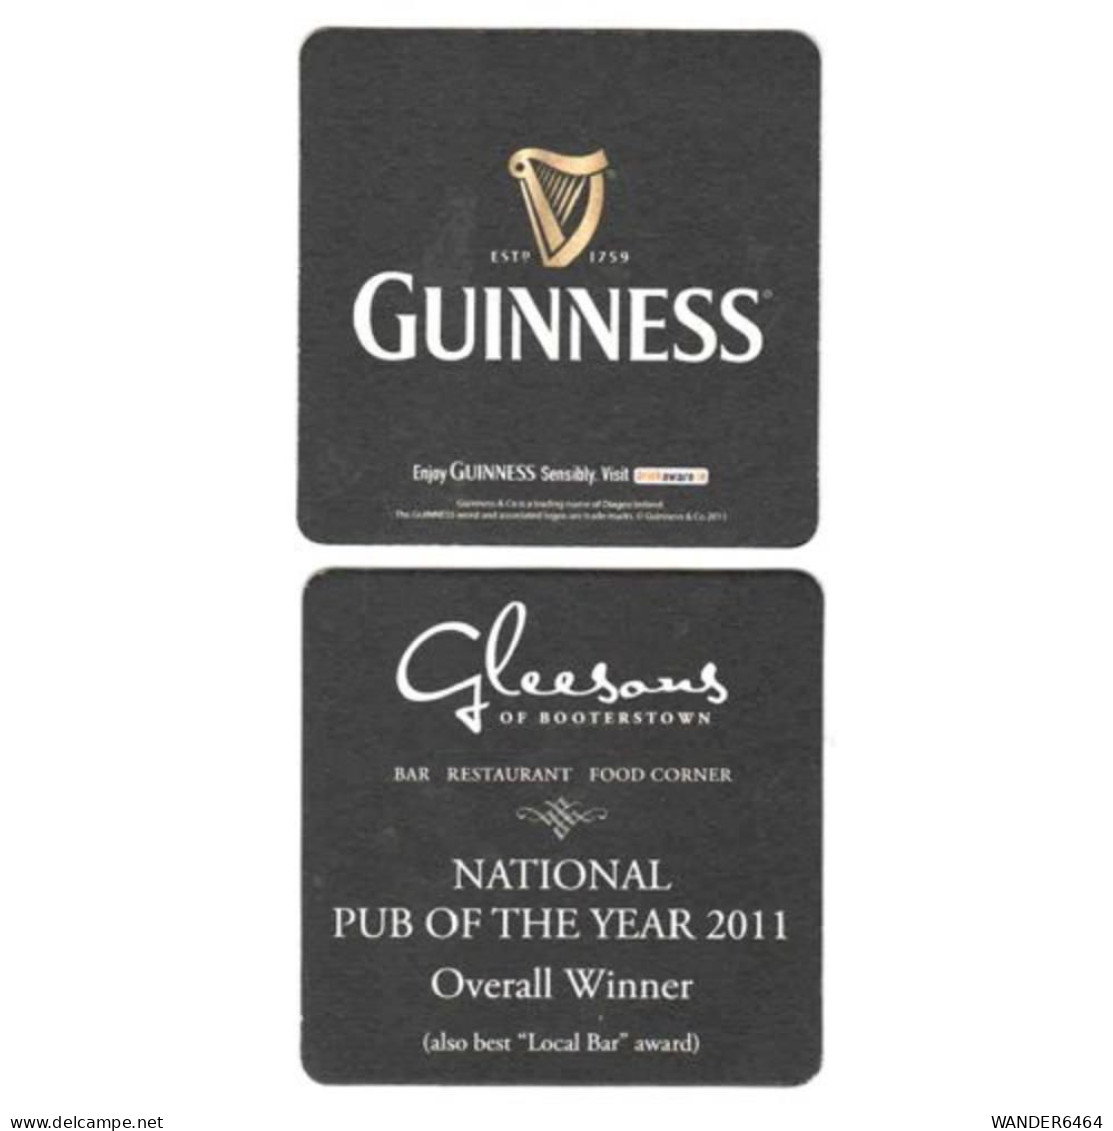 GUINNESS BREWERY  BEER  MATS - COASTERS #0057 - Sotto-boccale